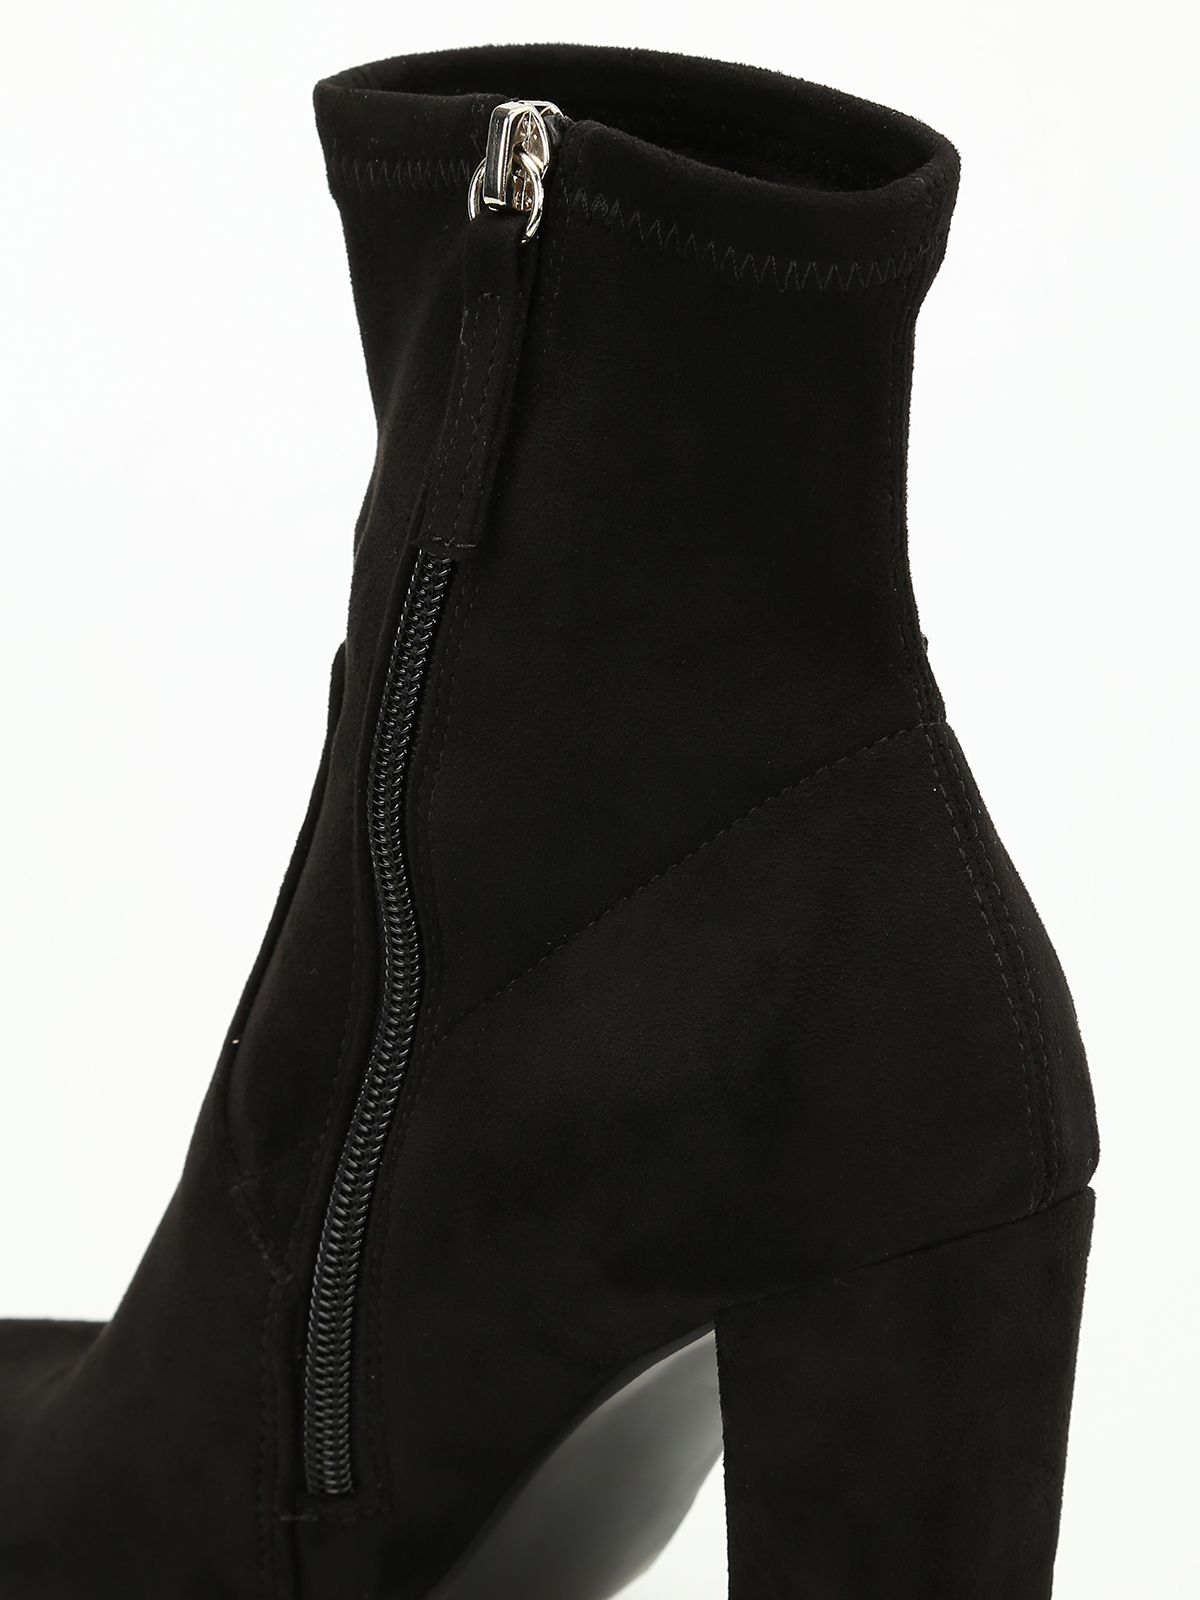 Calle principal fax Doncella Ankle boots Steve Madden - Edition rose patch booties - EDITIONBLACK